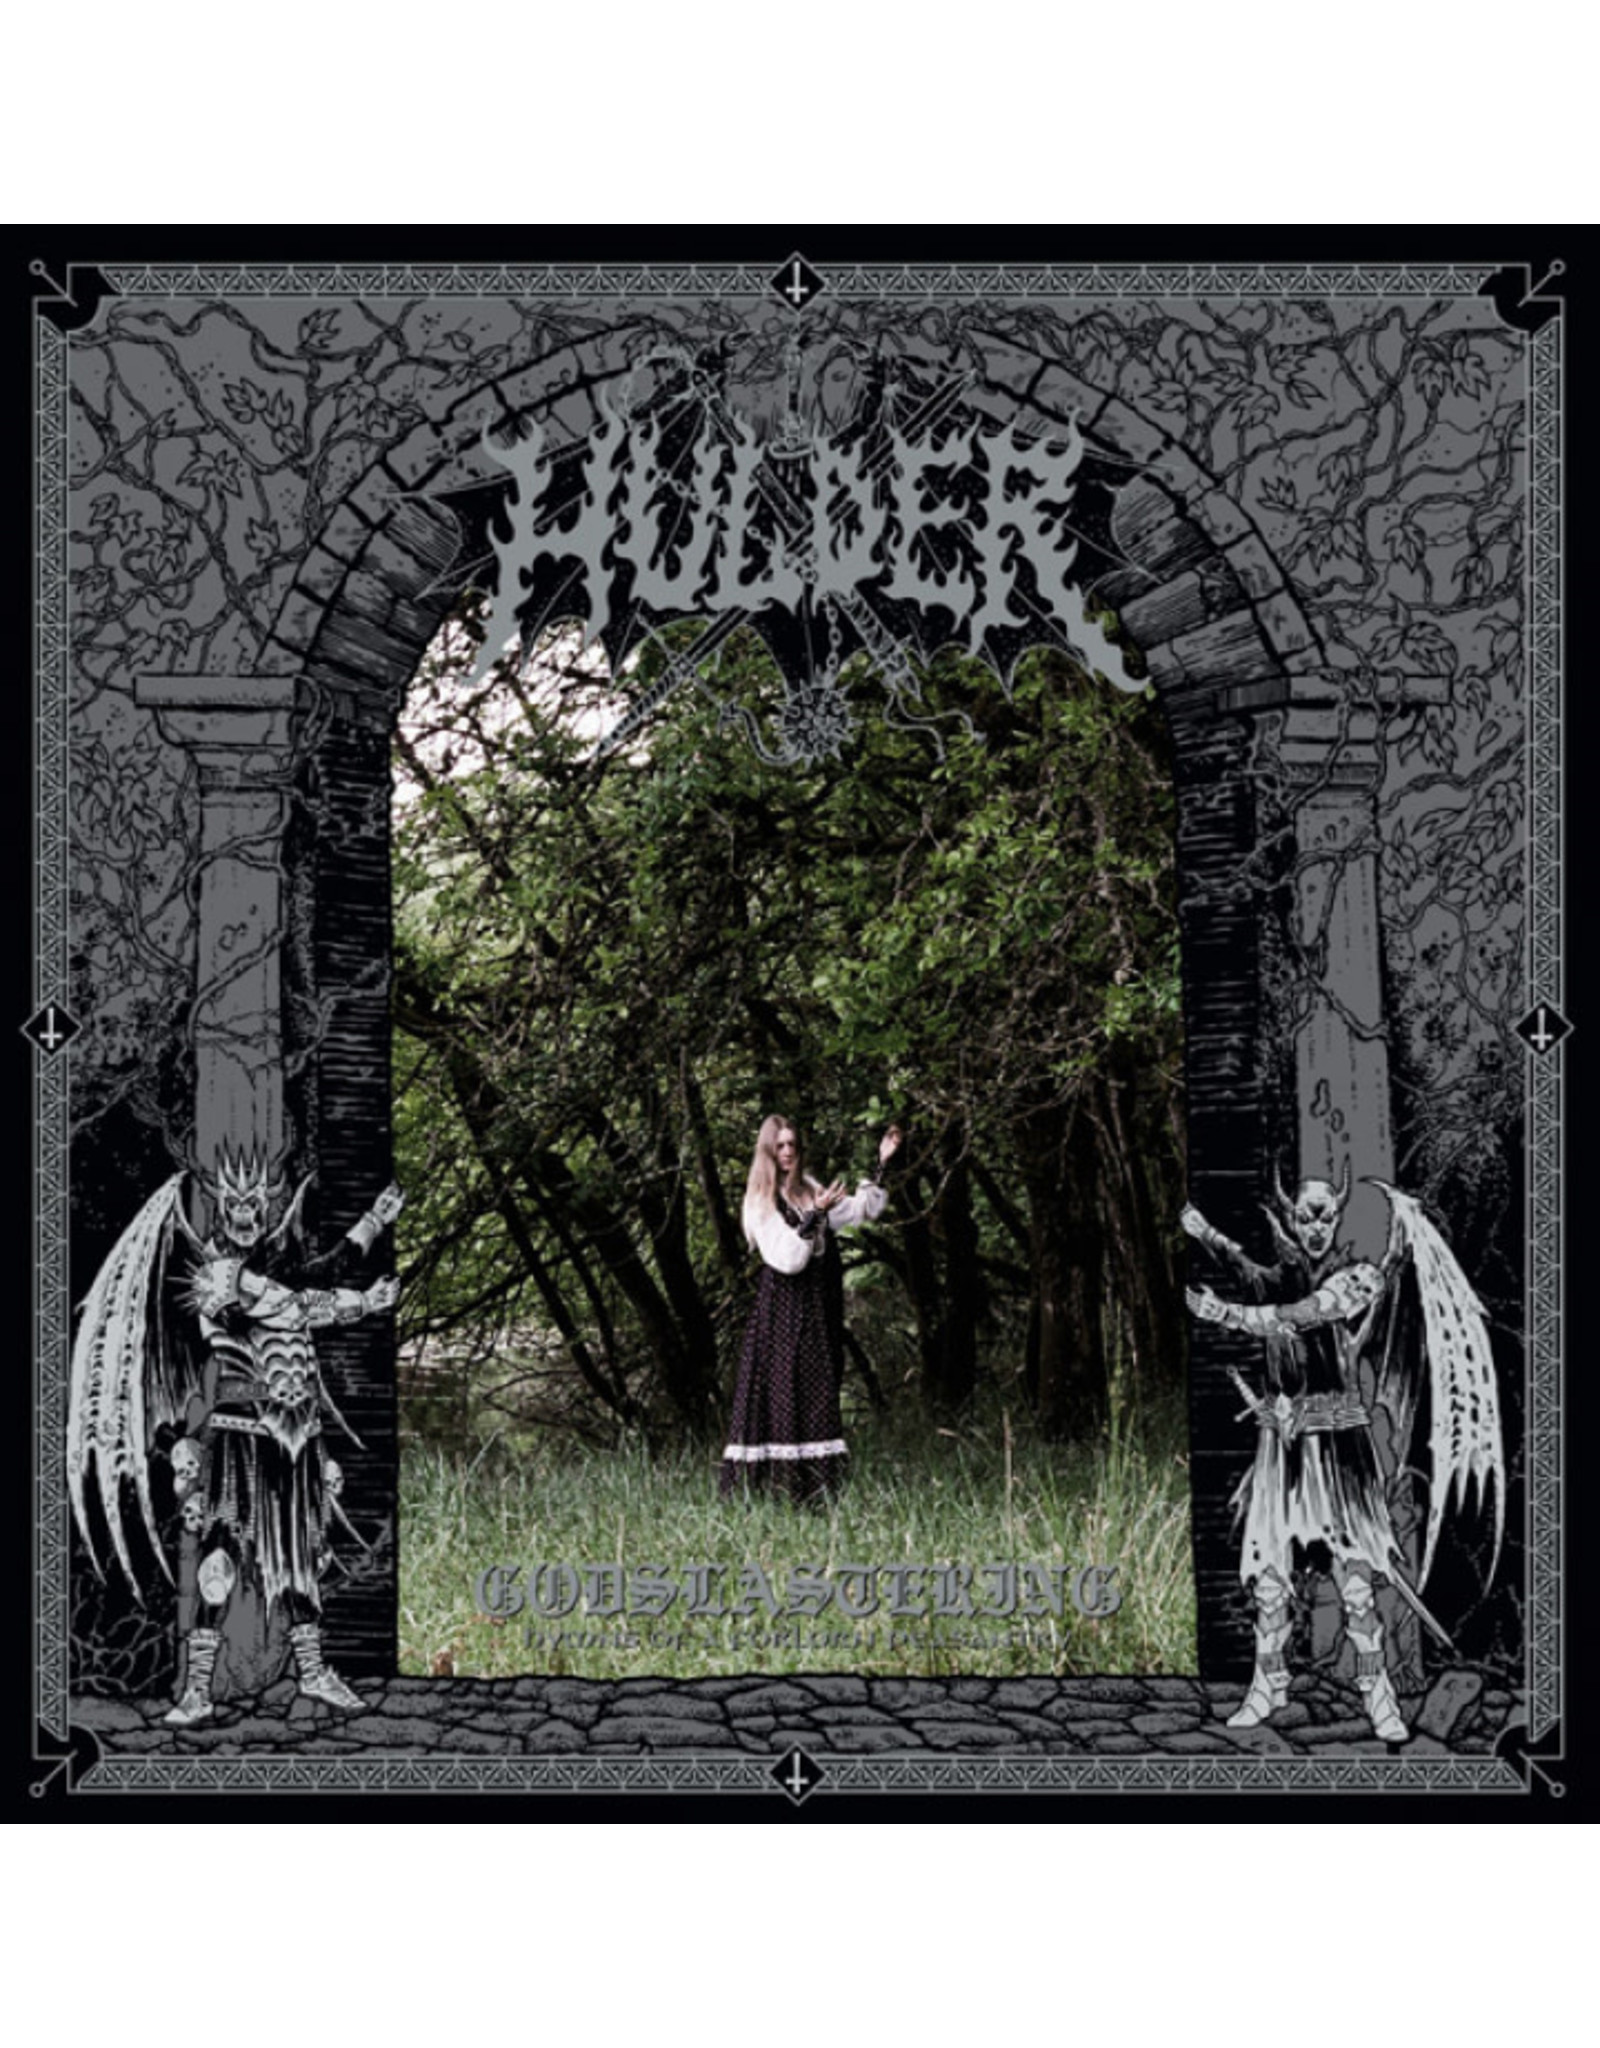 20 Buck Spin Hulder: Godslastering: Hymns Of A Forlorn Peasantry (Colour) LP